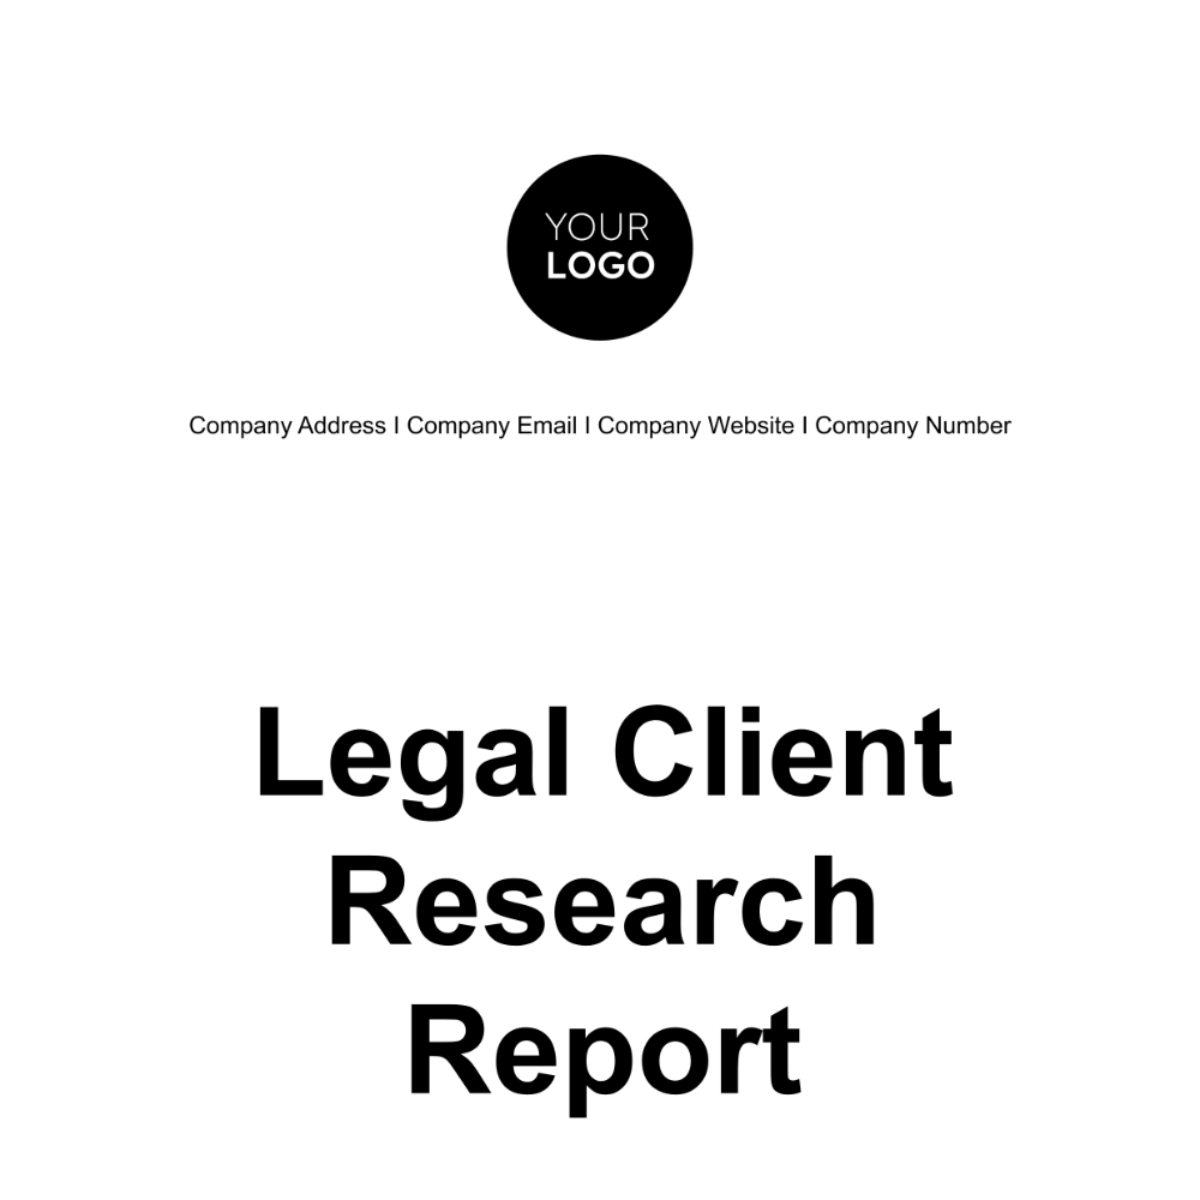 Legal Client Research Report Template